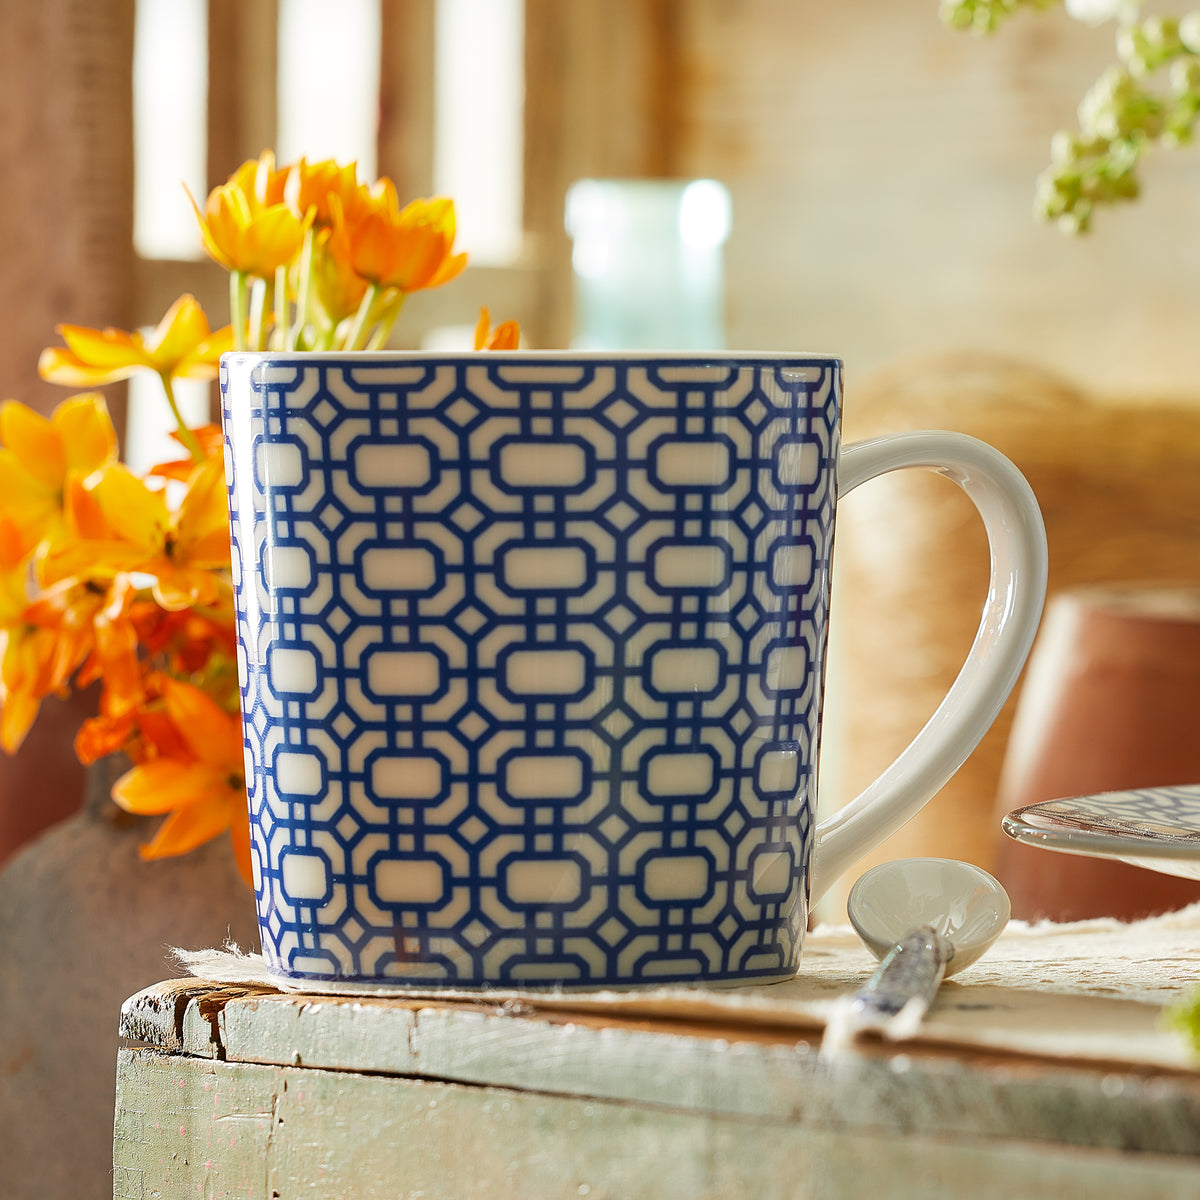 A Newport Garden Gate Mug made by Caskata Artisanal Home, with its blue and white patterned graphic design made of creamy white porcelain, sits on a wooden surface next to a teaspoon and orange flowers, blending charm with practicality as it is both dishwasher and microwave safe.